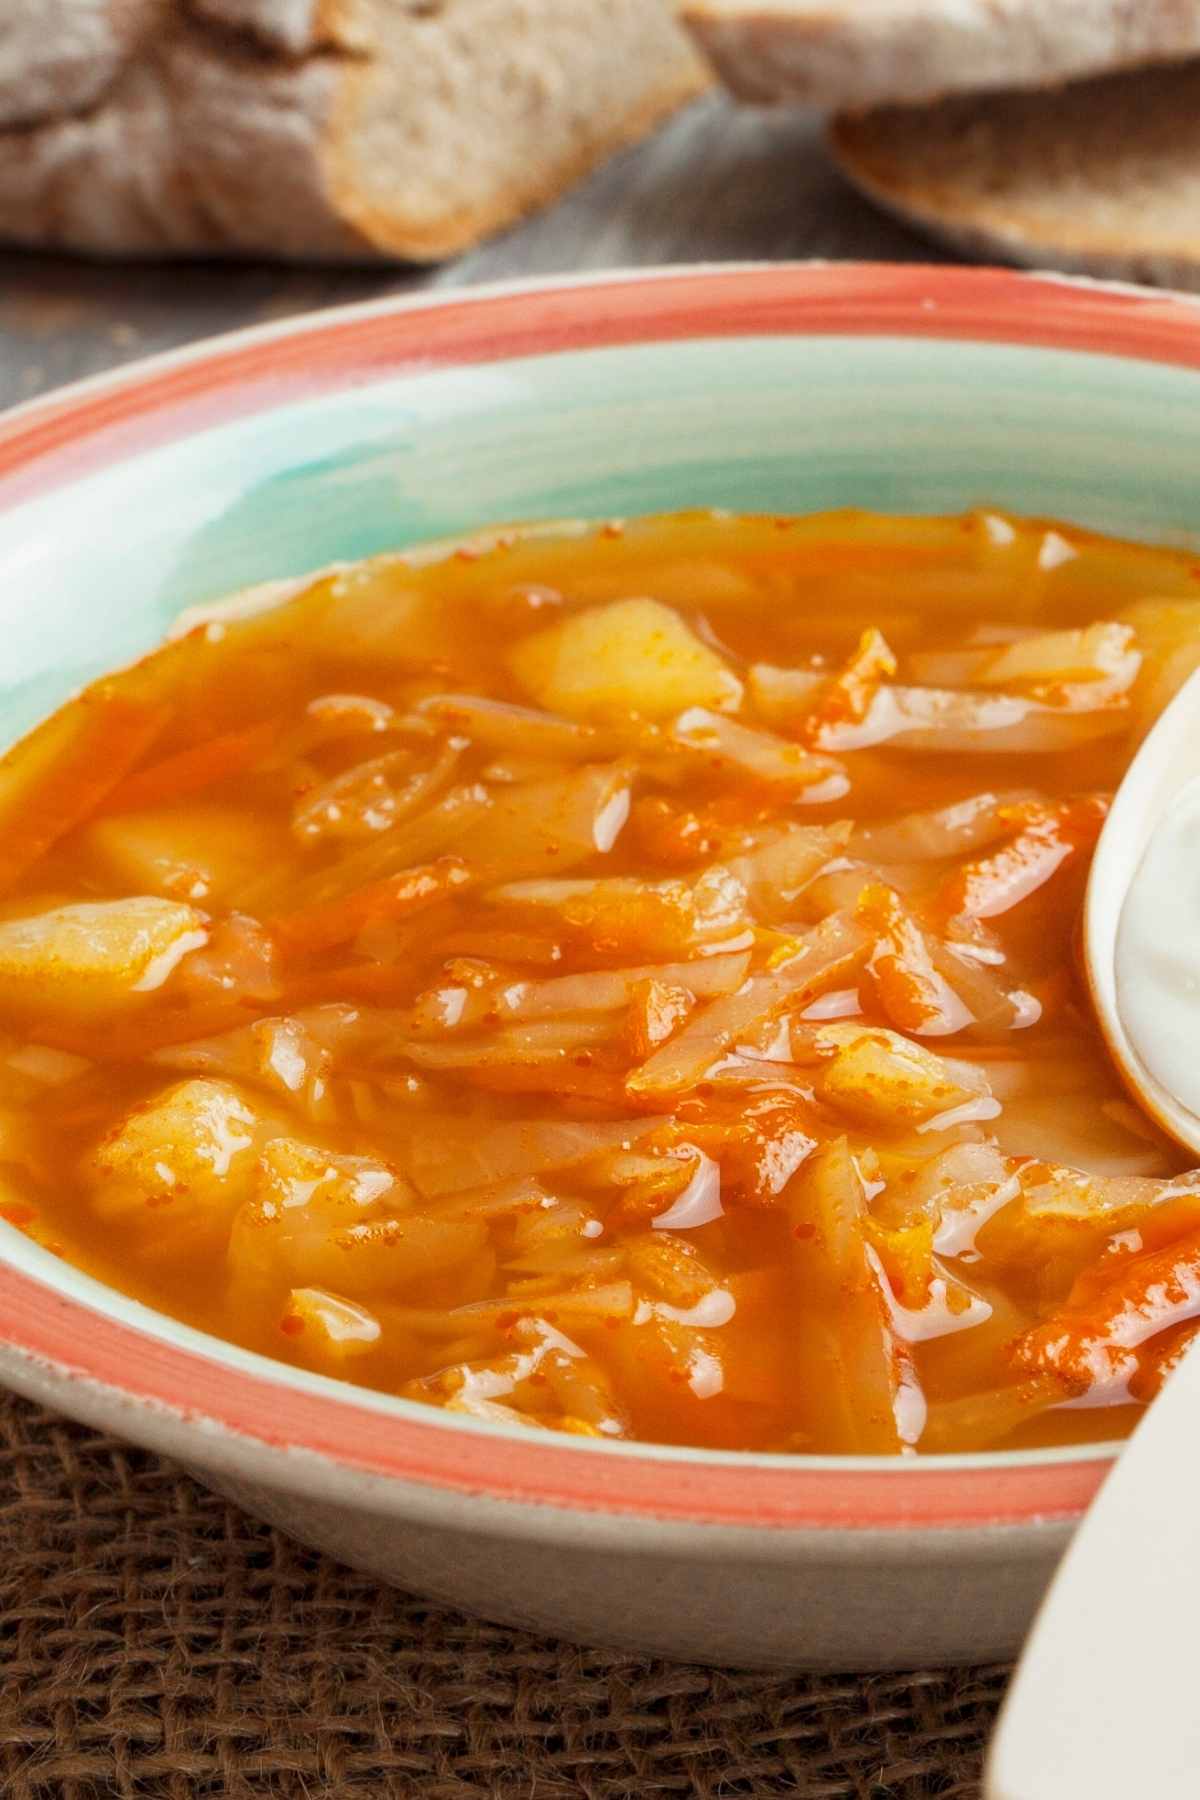 If you are looking for an easy and tasty way to lose some weight, look no further! This Cabbage Soup Diet Recipe is packed with healthy ingredients, flavor, and nutrition. It's even known as the Wonder Soup for its health benefits and ability to promote short-term weight loss!